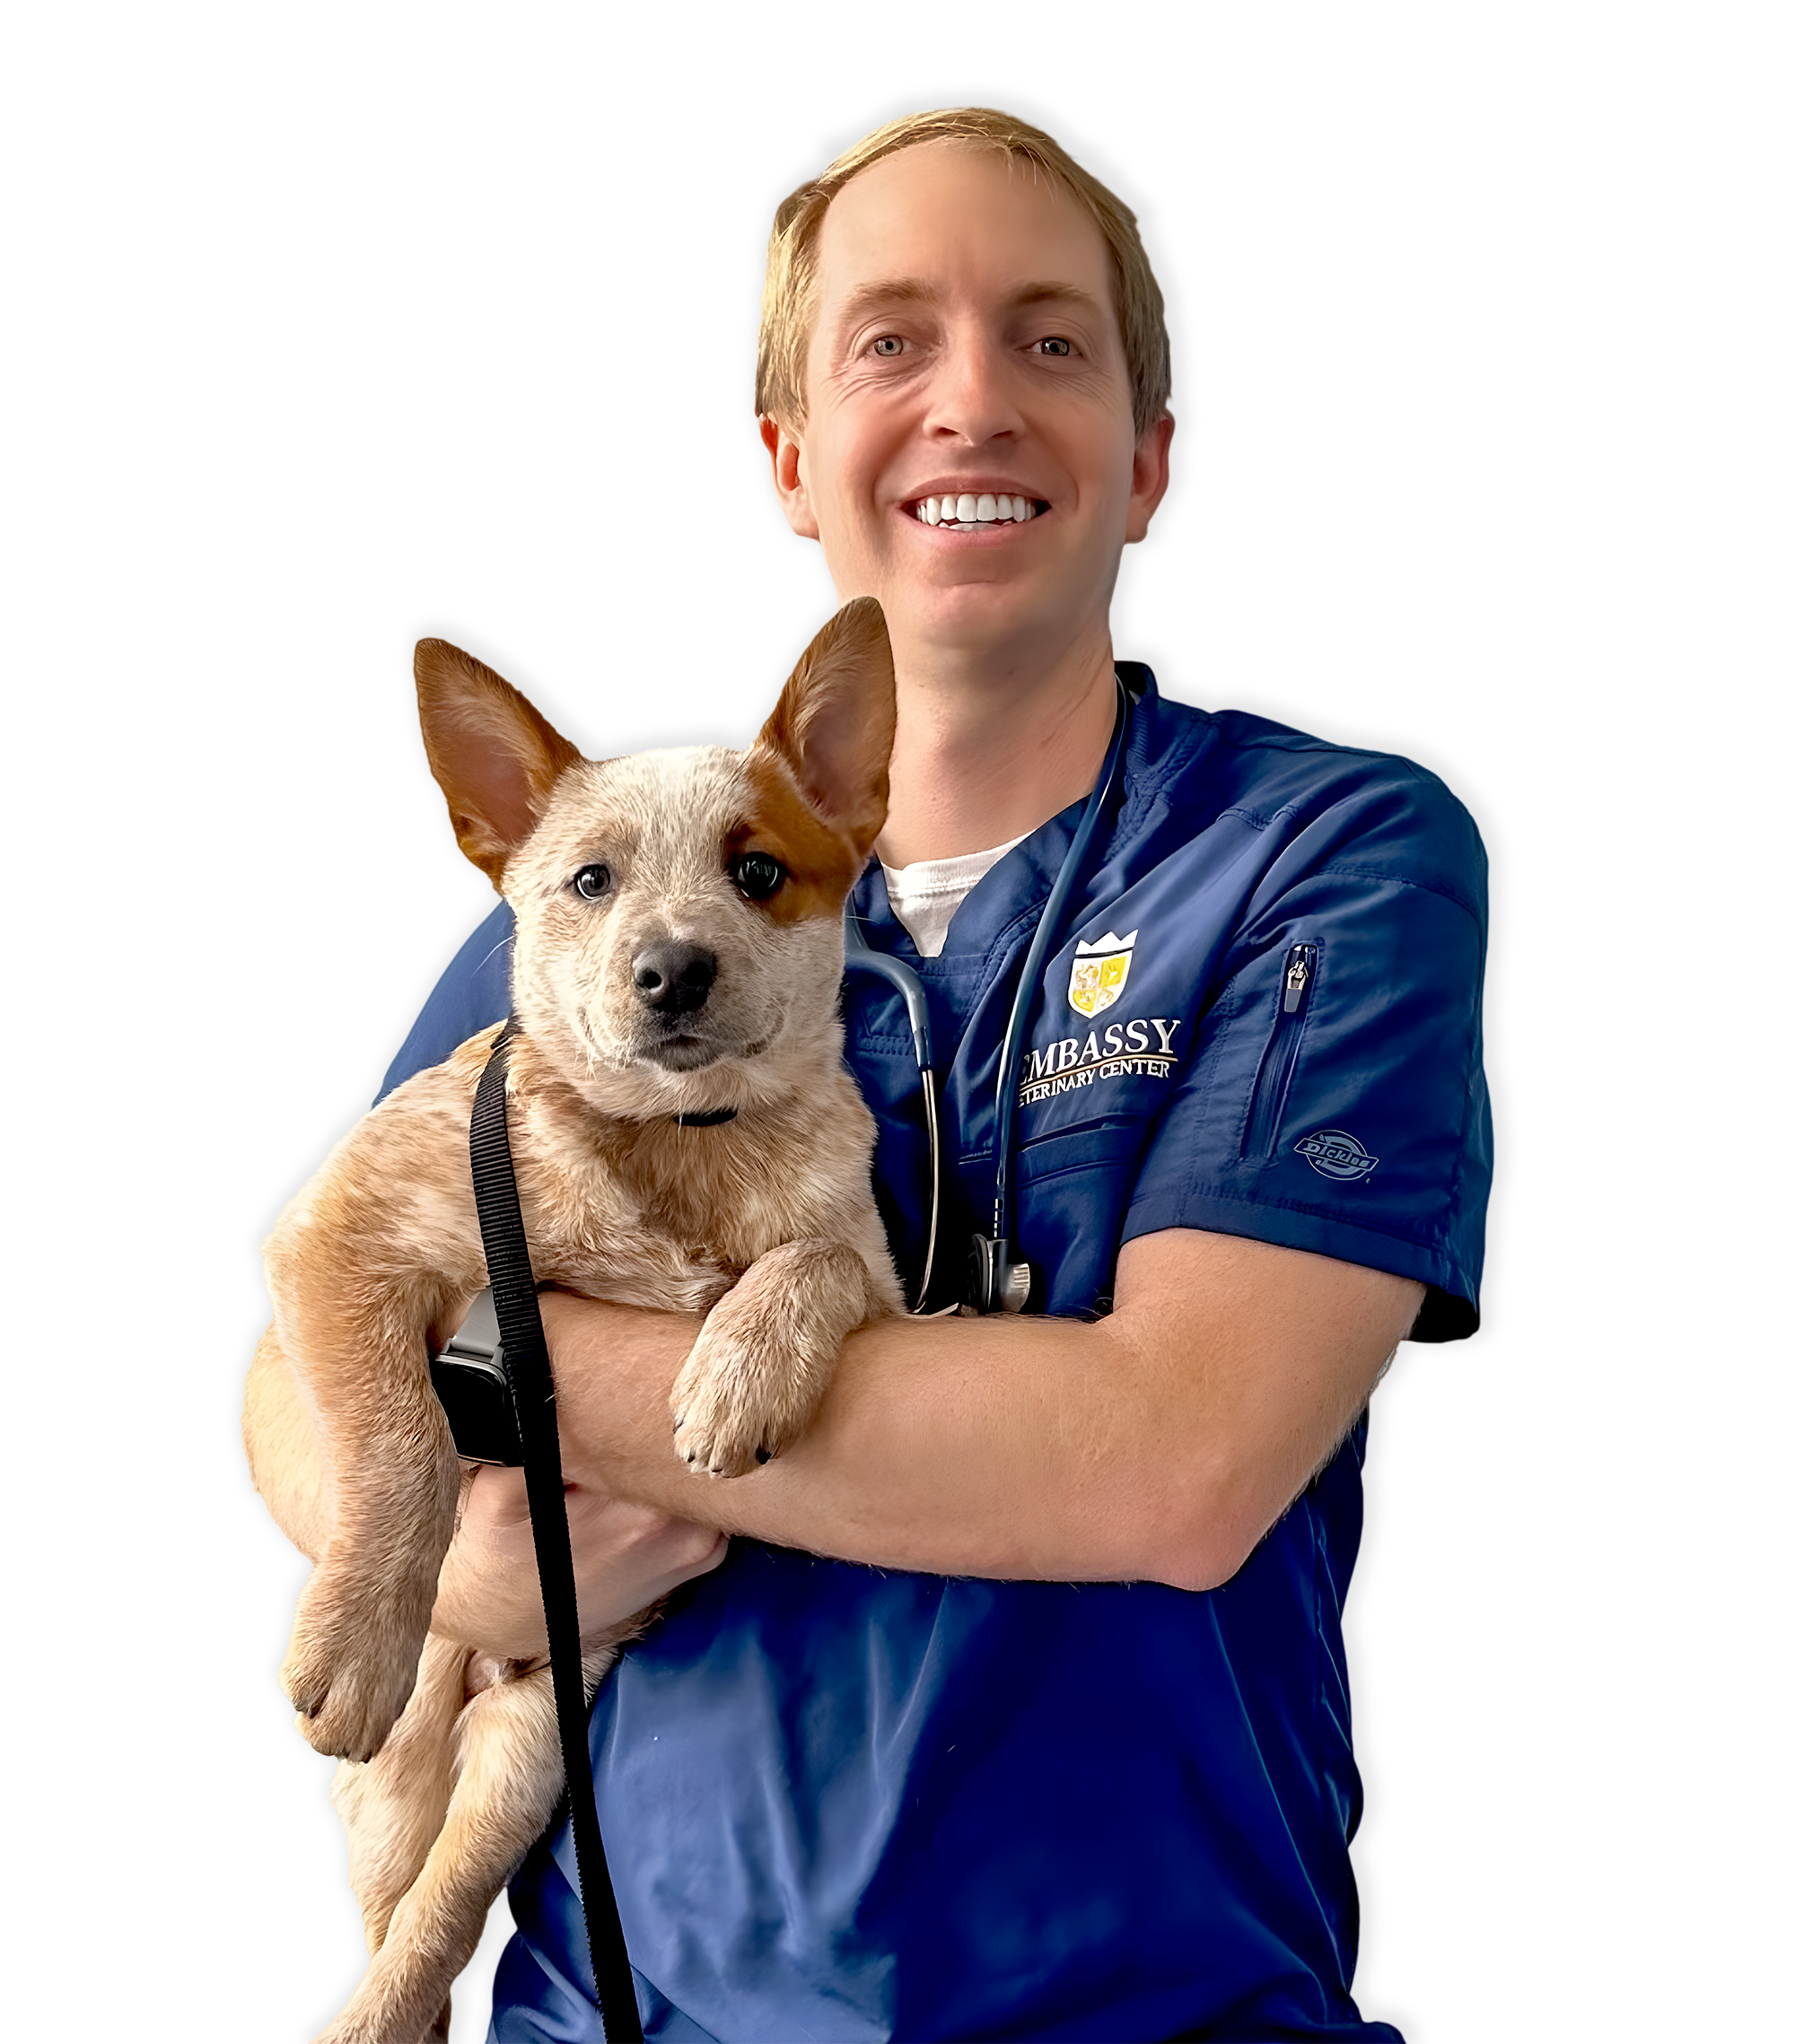 Veterinarian holding a dog.